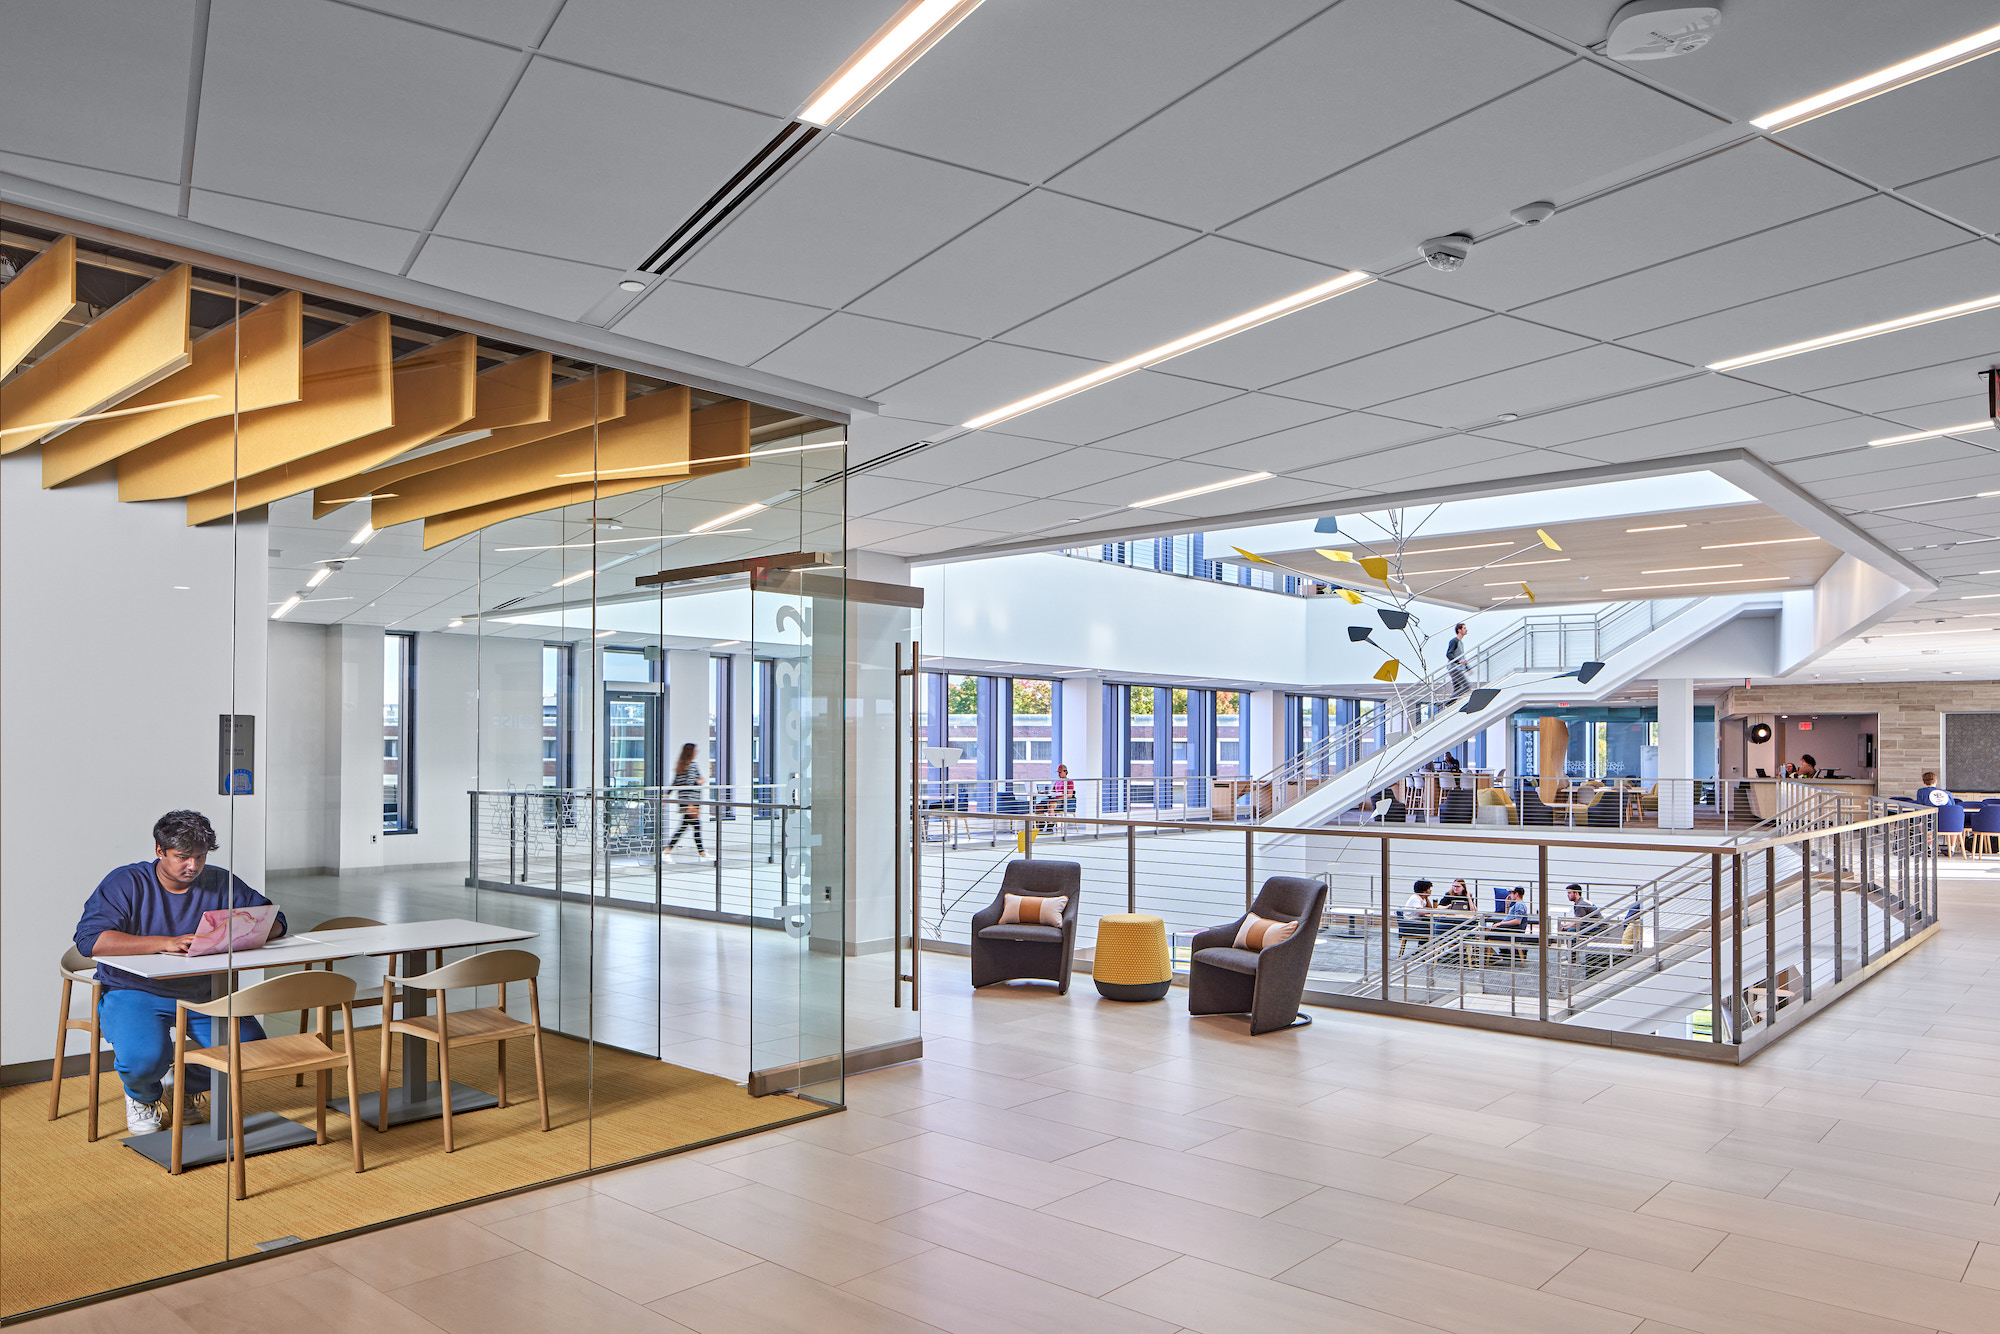 Kettering University Learning Commons designed by Stantec, Jason Keen Photography 4.jpeg